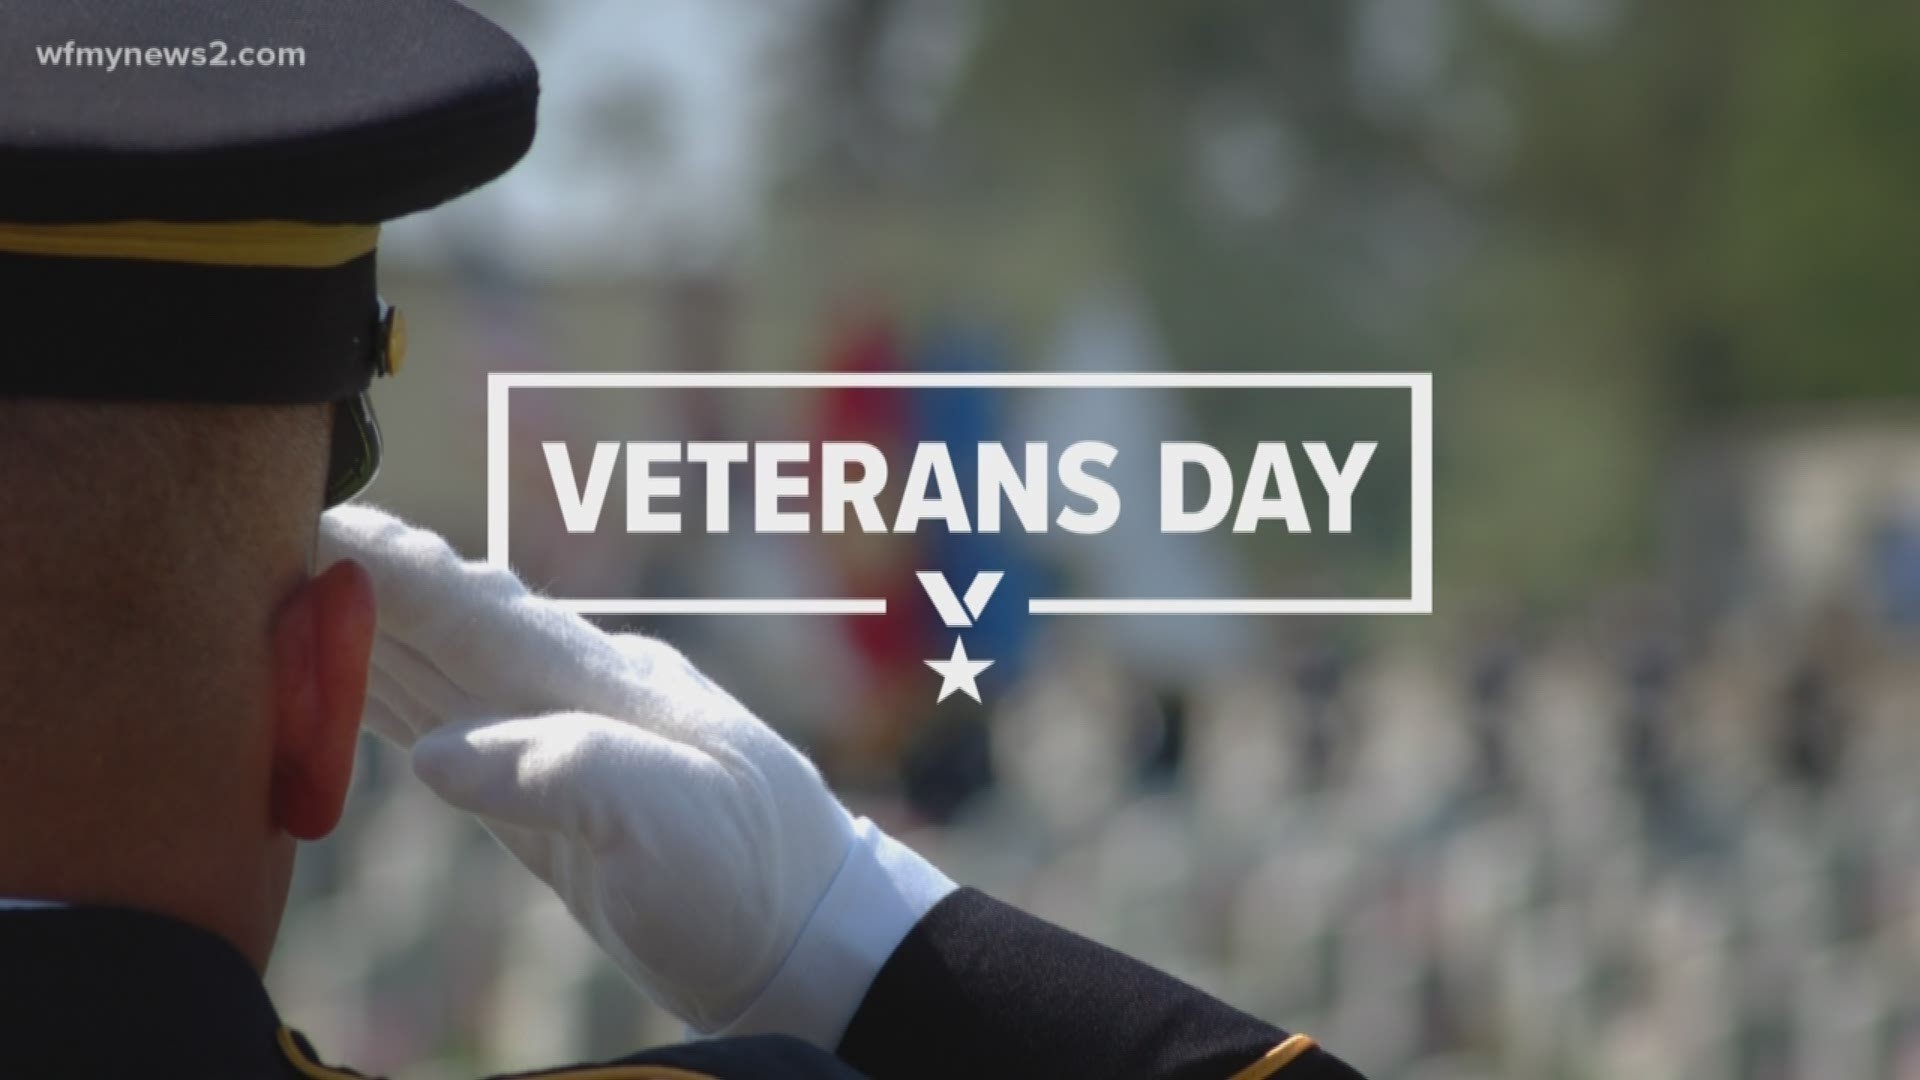 Freedom isn't free. We thank all our veterans - past and present - for their service and sacrifice.